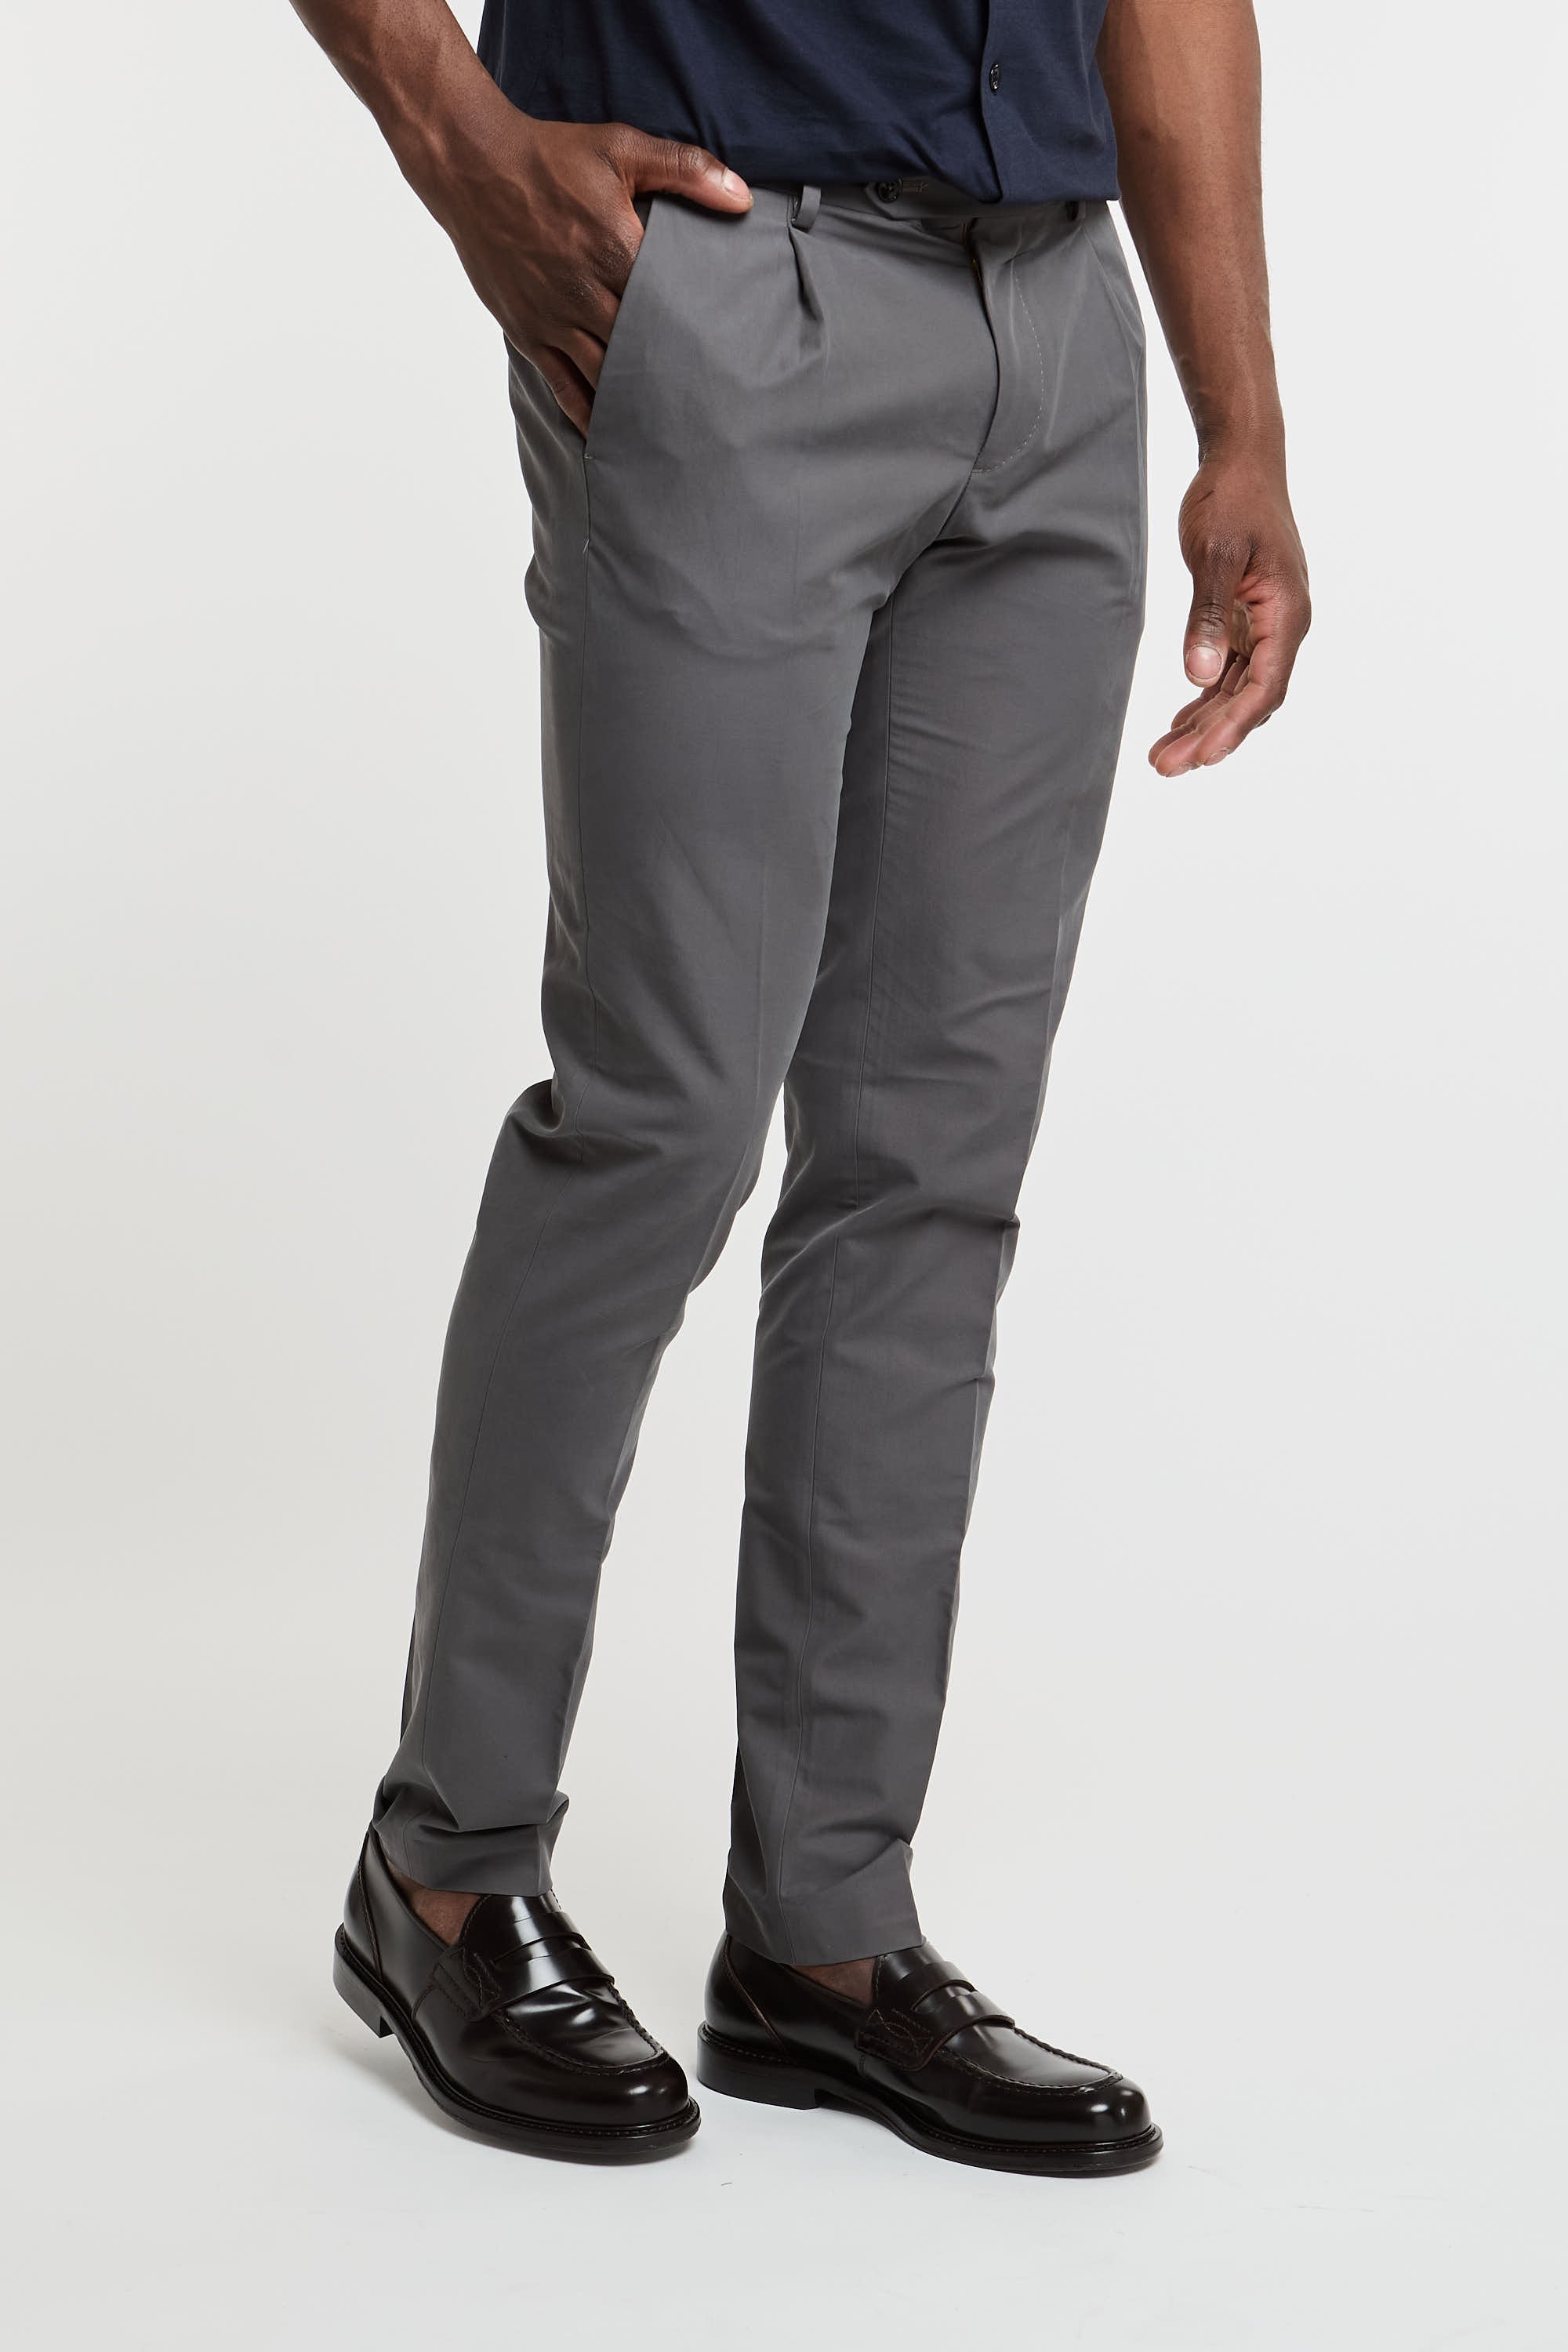 Berwich Trousers with Pleats Cotton/Polyamide Grey-1